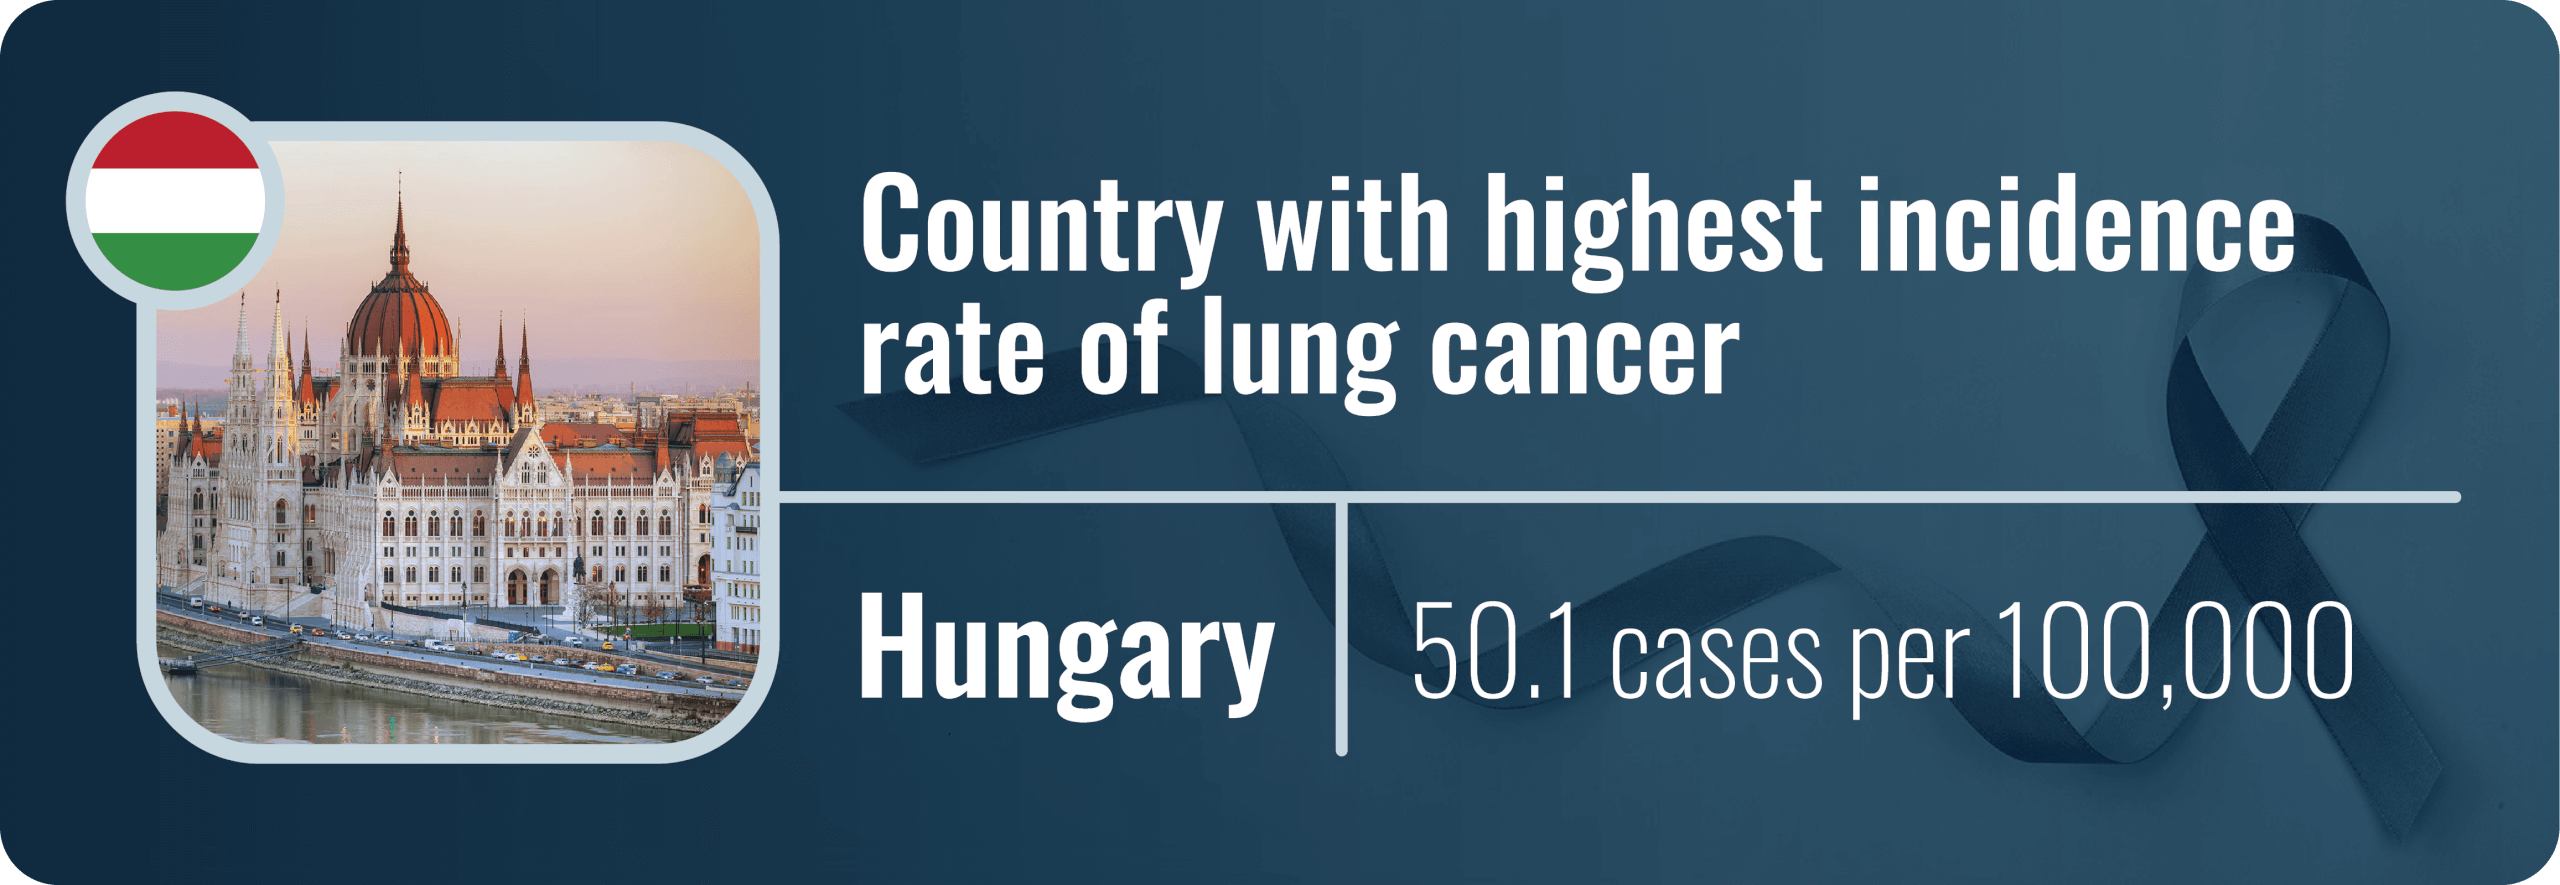 An infographic showing the country with the highest lung cancer rate